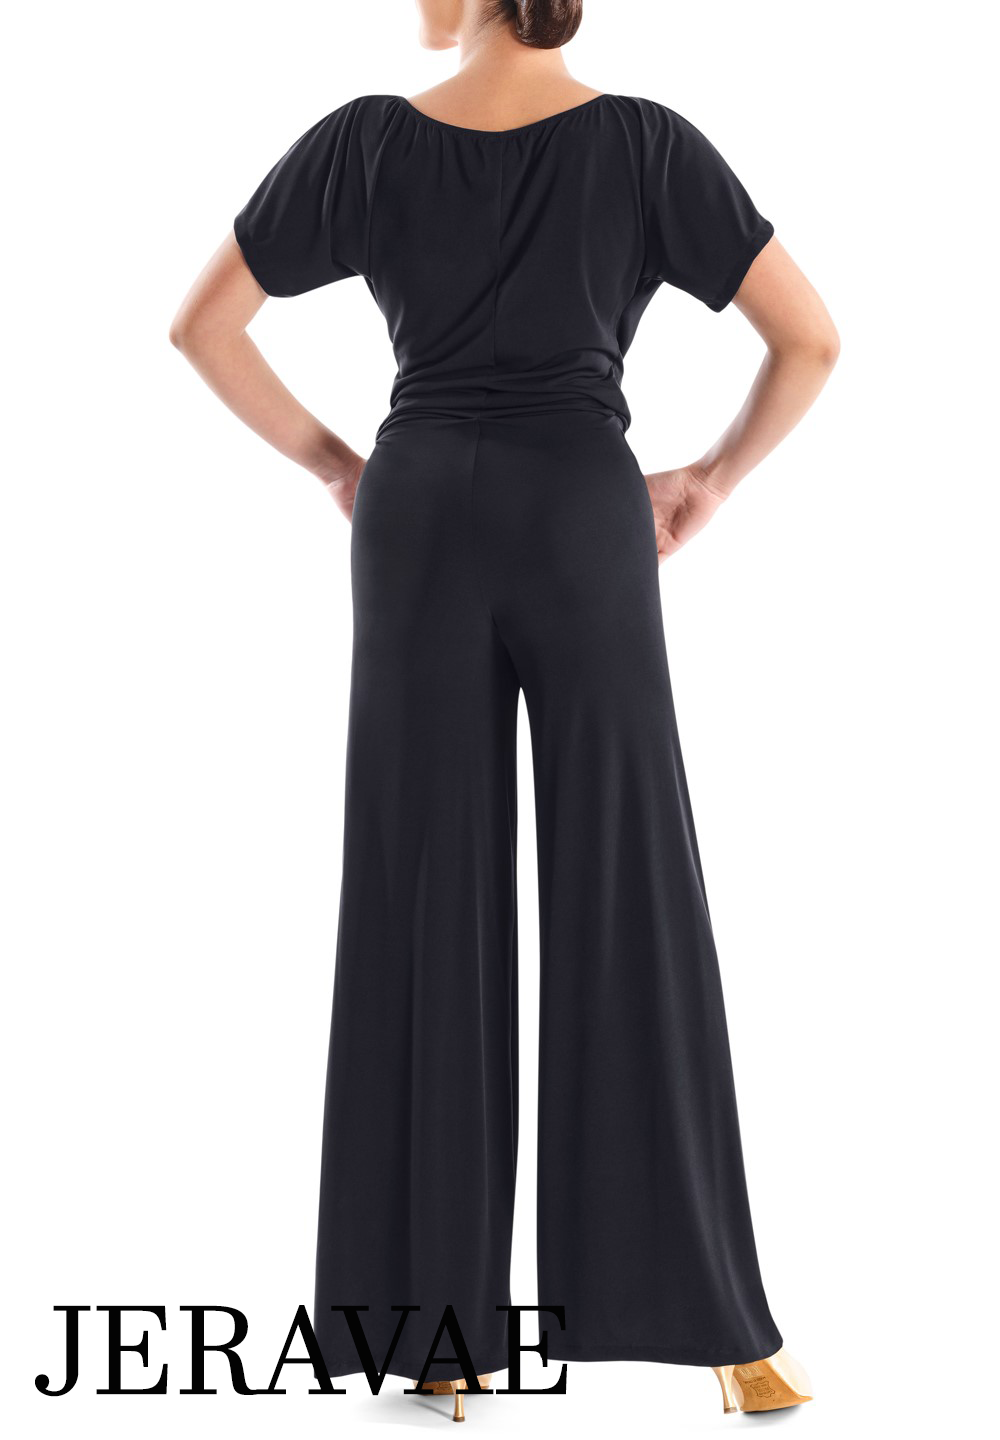 Victoria Blitz Gioiosa Black One Piece Ballroom or Latin Jumpsuit with V-Neckline, Wrap-around Top, Short Sleeves, and Wide Leg PRA 729 in Stock